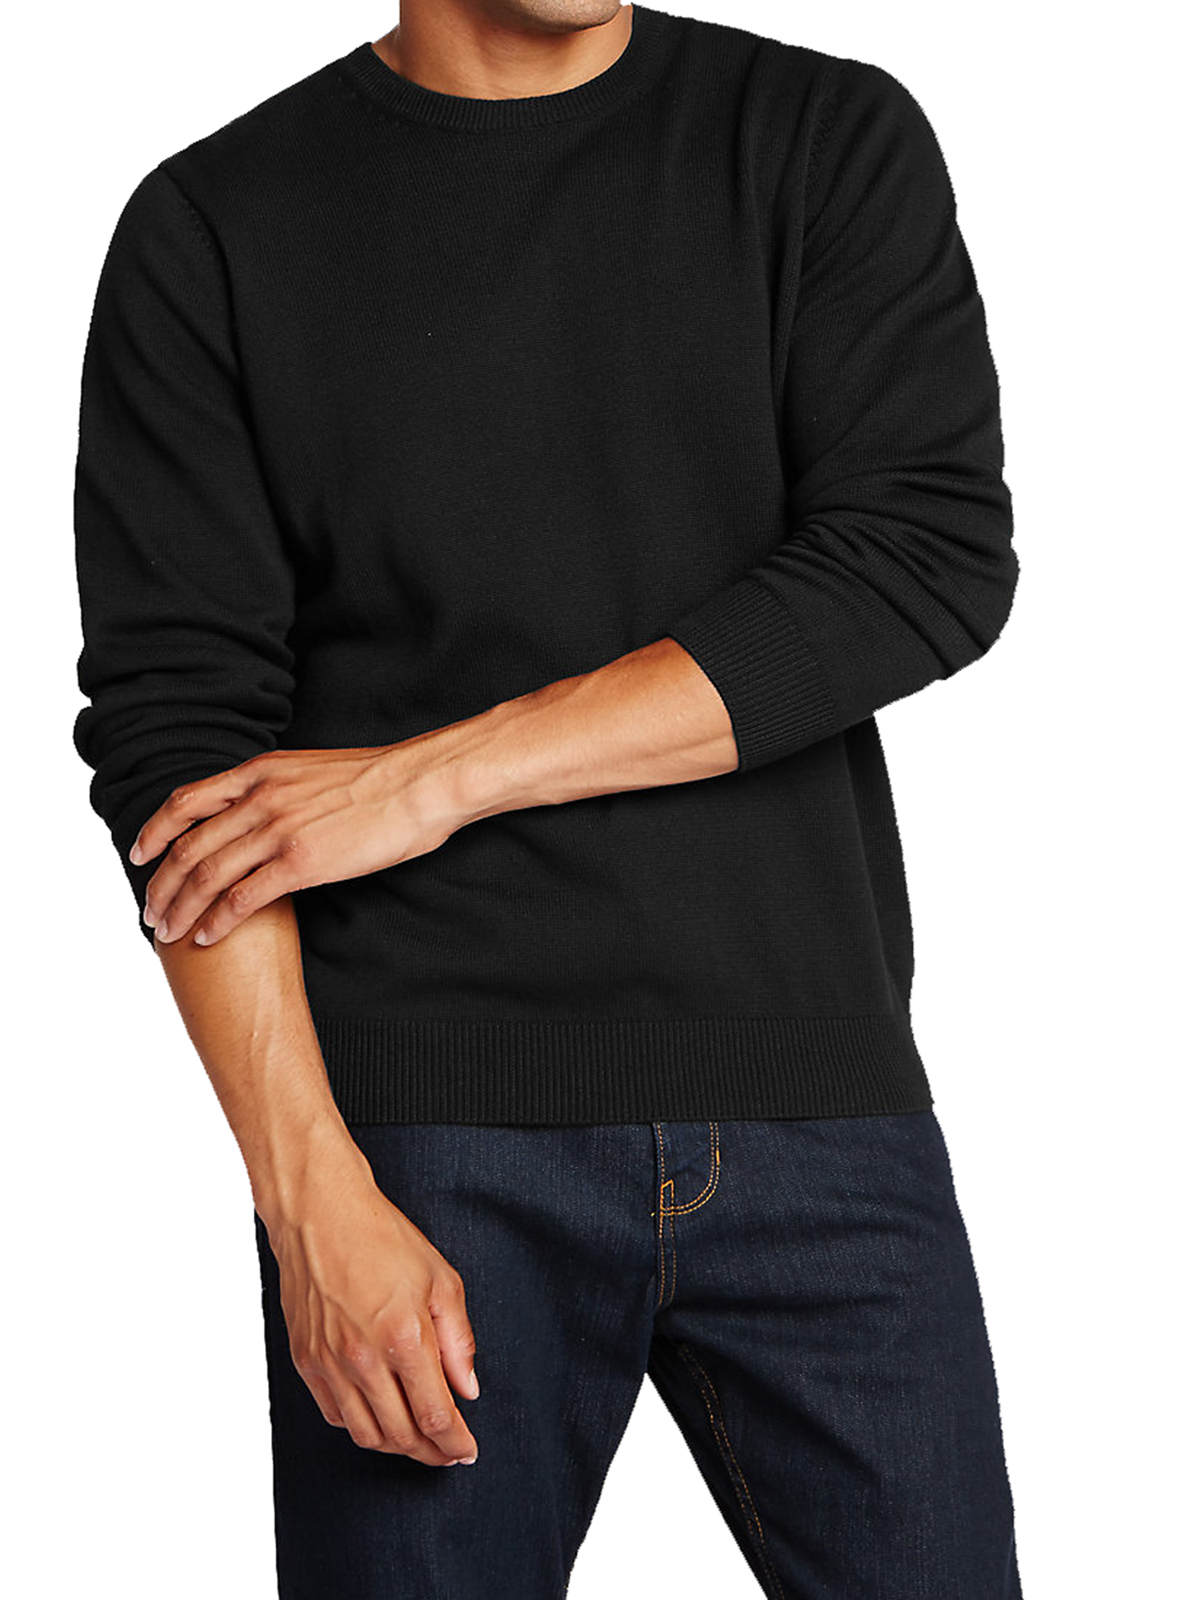 Marks and Spencer - - M&5 BLACK Pure Cotton Crew Neck Jumper - Size ...